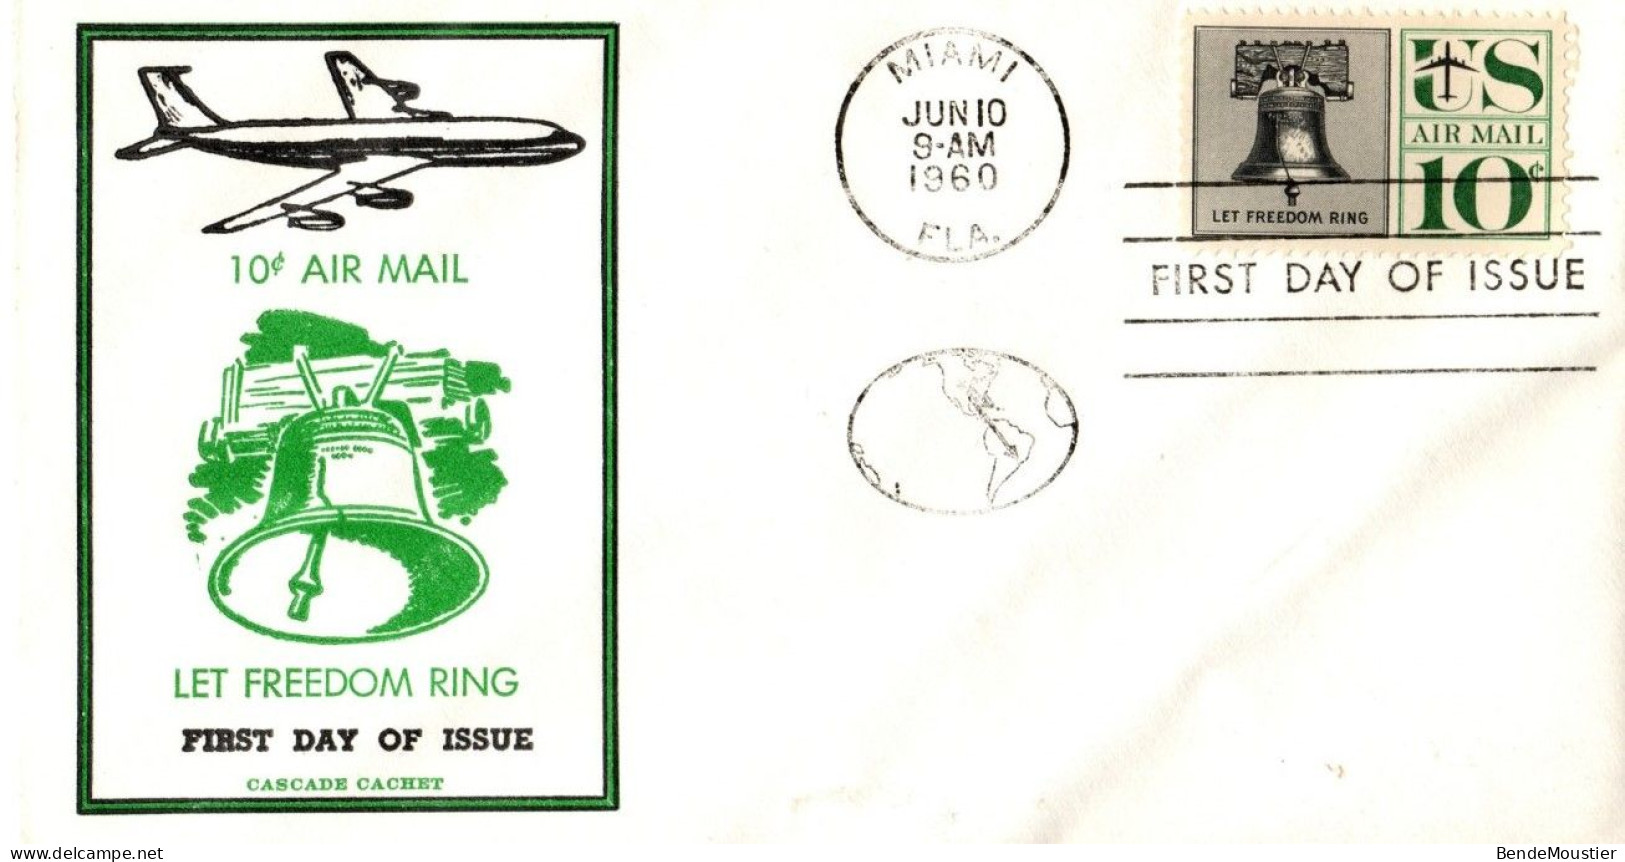 (R19) USA  FDI - 10 C Air Mail - Let Freedom Ring - Cascade Cachet - Miami 1960. - 2c. 1941-1960 Covers